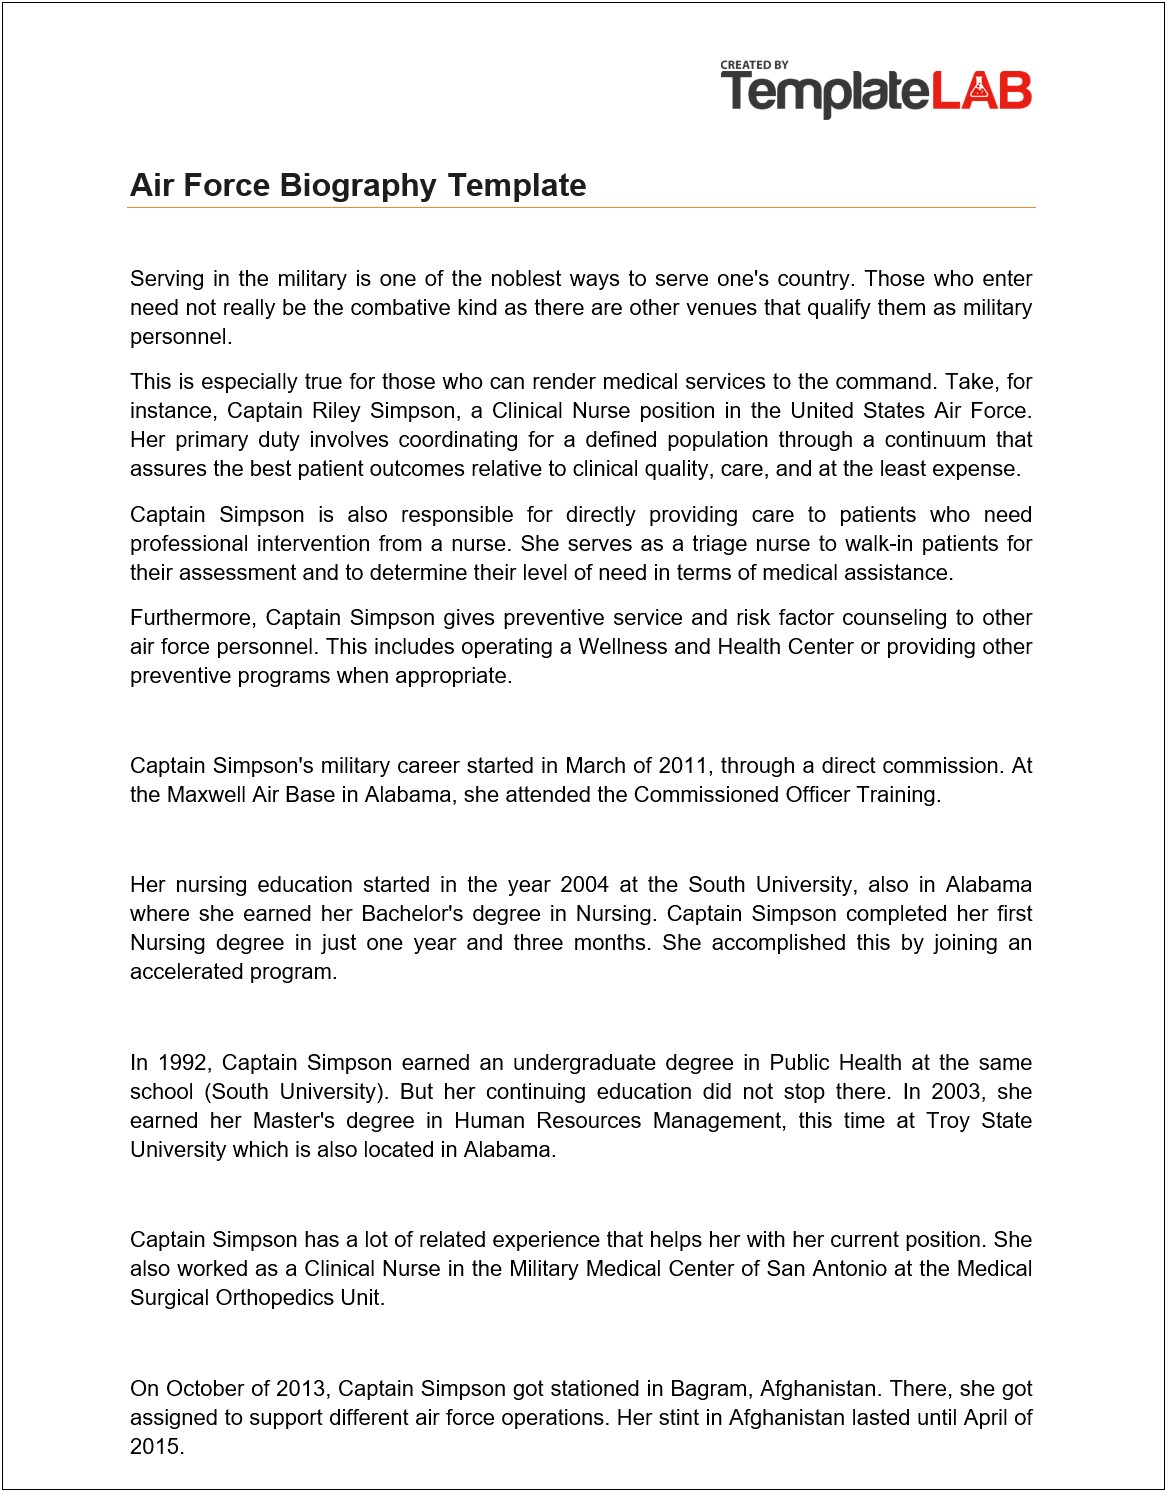 Personal Biography Template Free Download For Pledging Fraternity